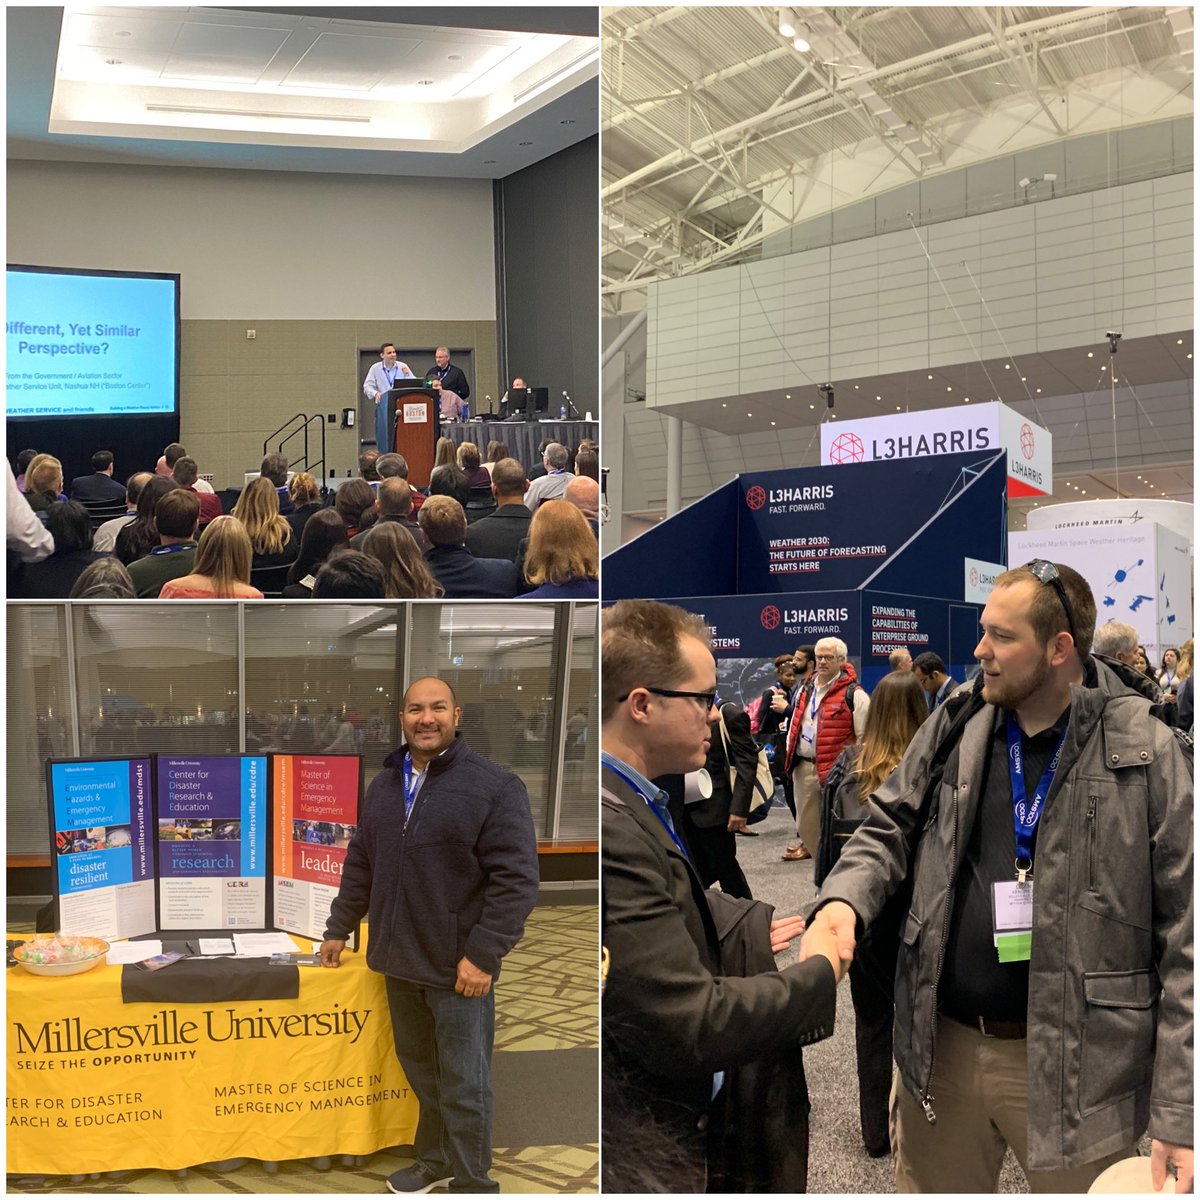 Last week during the 100th Annual @ametsoc Meeting, seven current students & alums of the MSEM program presented meteorological studies!

Current students:  @kc2jcb  @weatherwxtiempo @ambersballoons @WX5GLK and Austin Patrick 

Alums:  @wx_becks @ChrisGNBCBoston 
#AMS100 #AMS2020